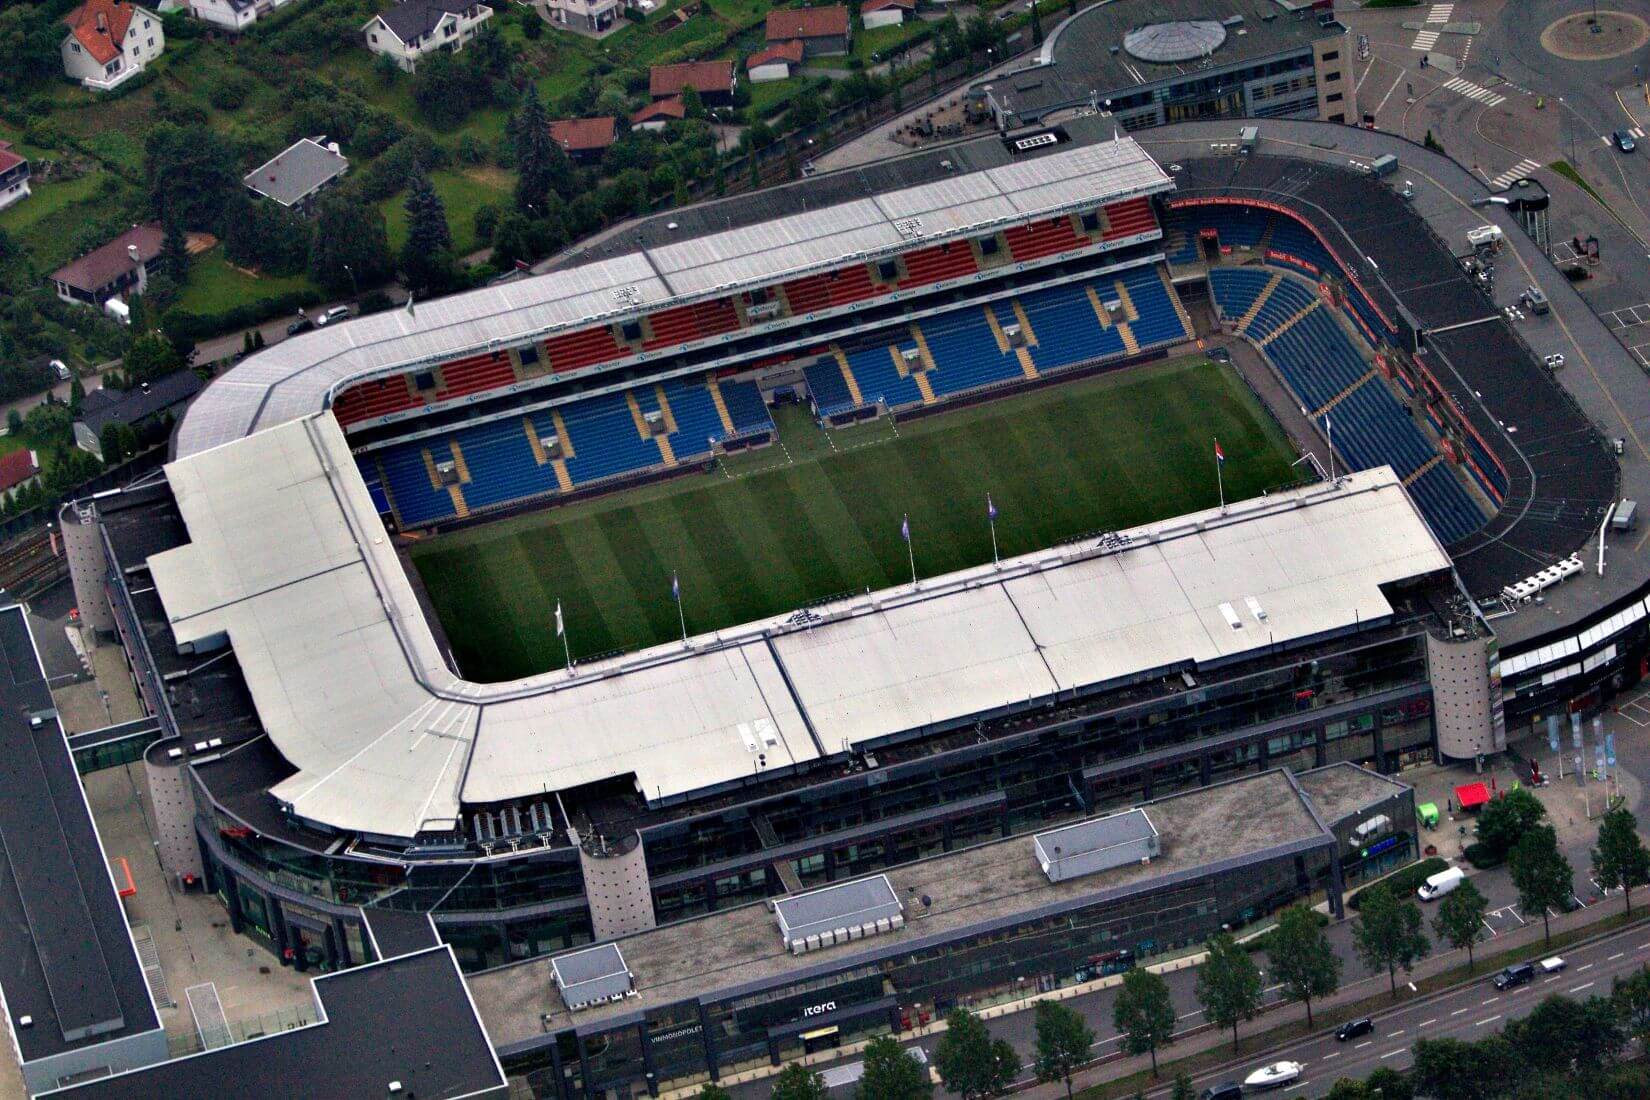 17-mind-blowing-facts-about-ullevaal-stadion